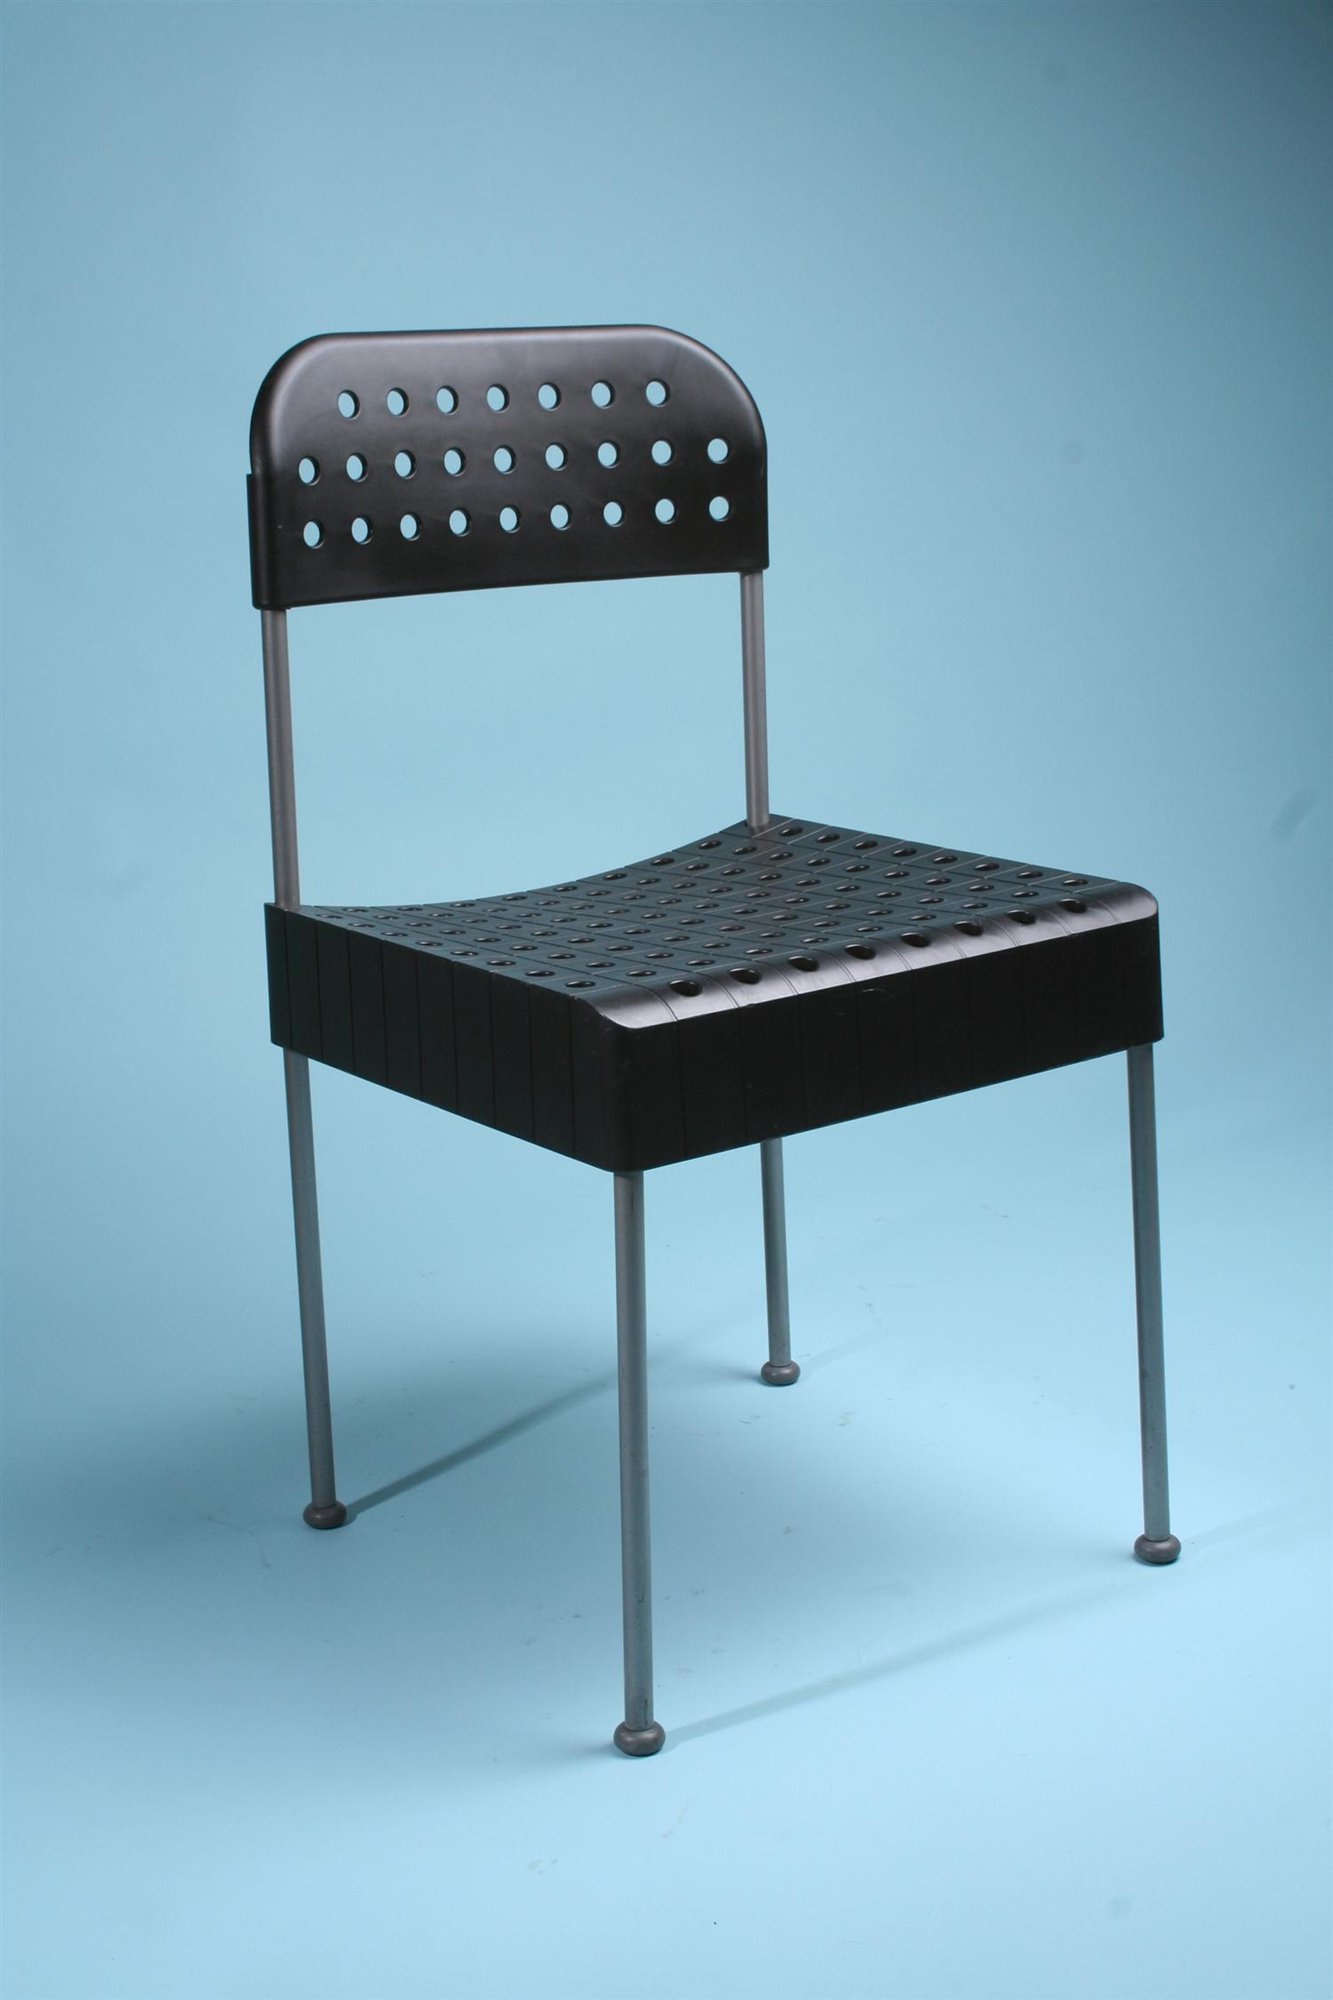 Chairs, Box. Designed by Enzo Mari for Driade — Modernity